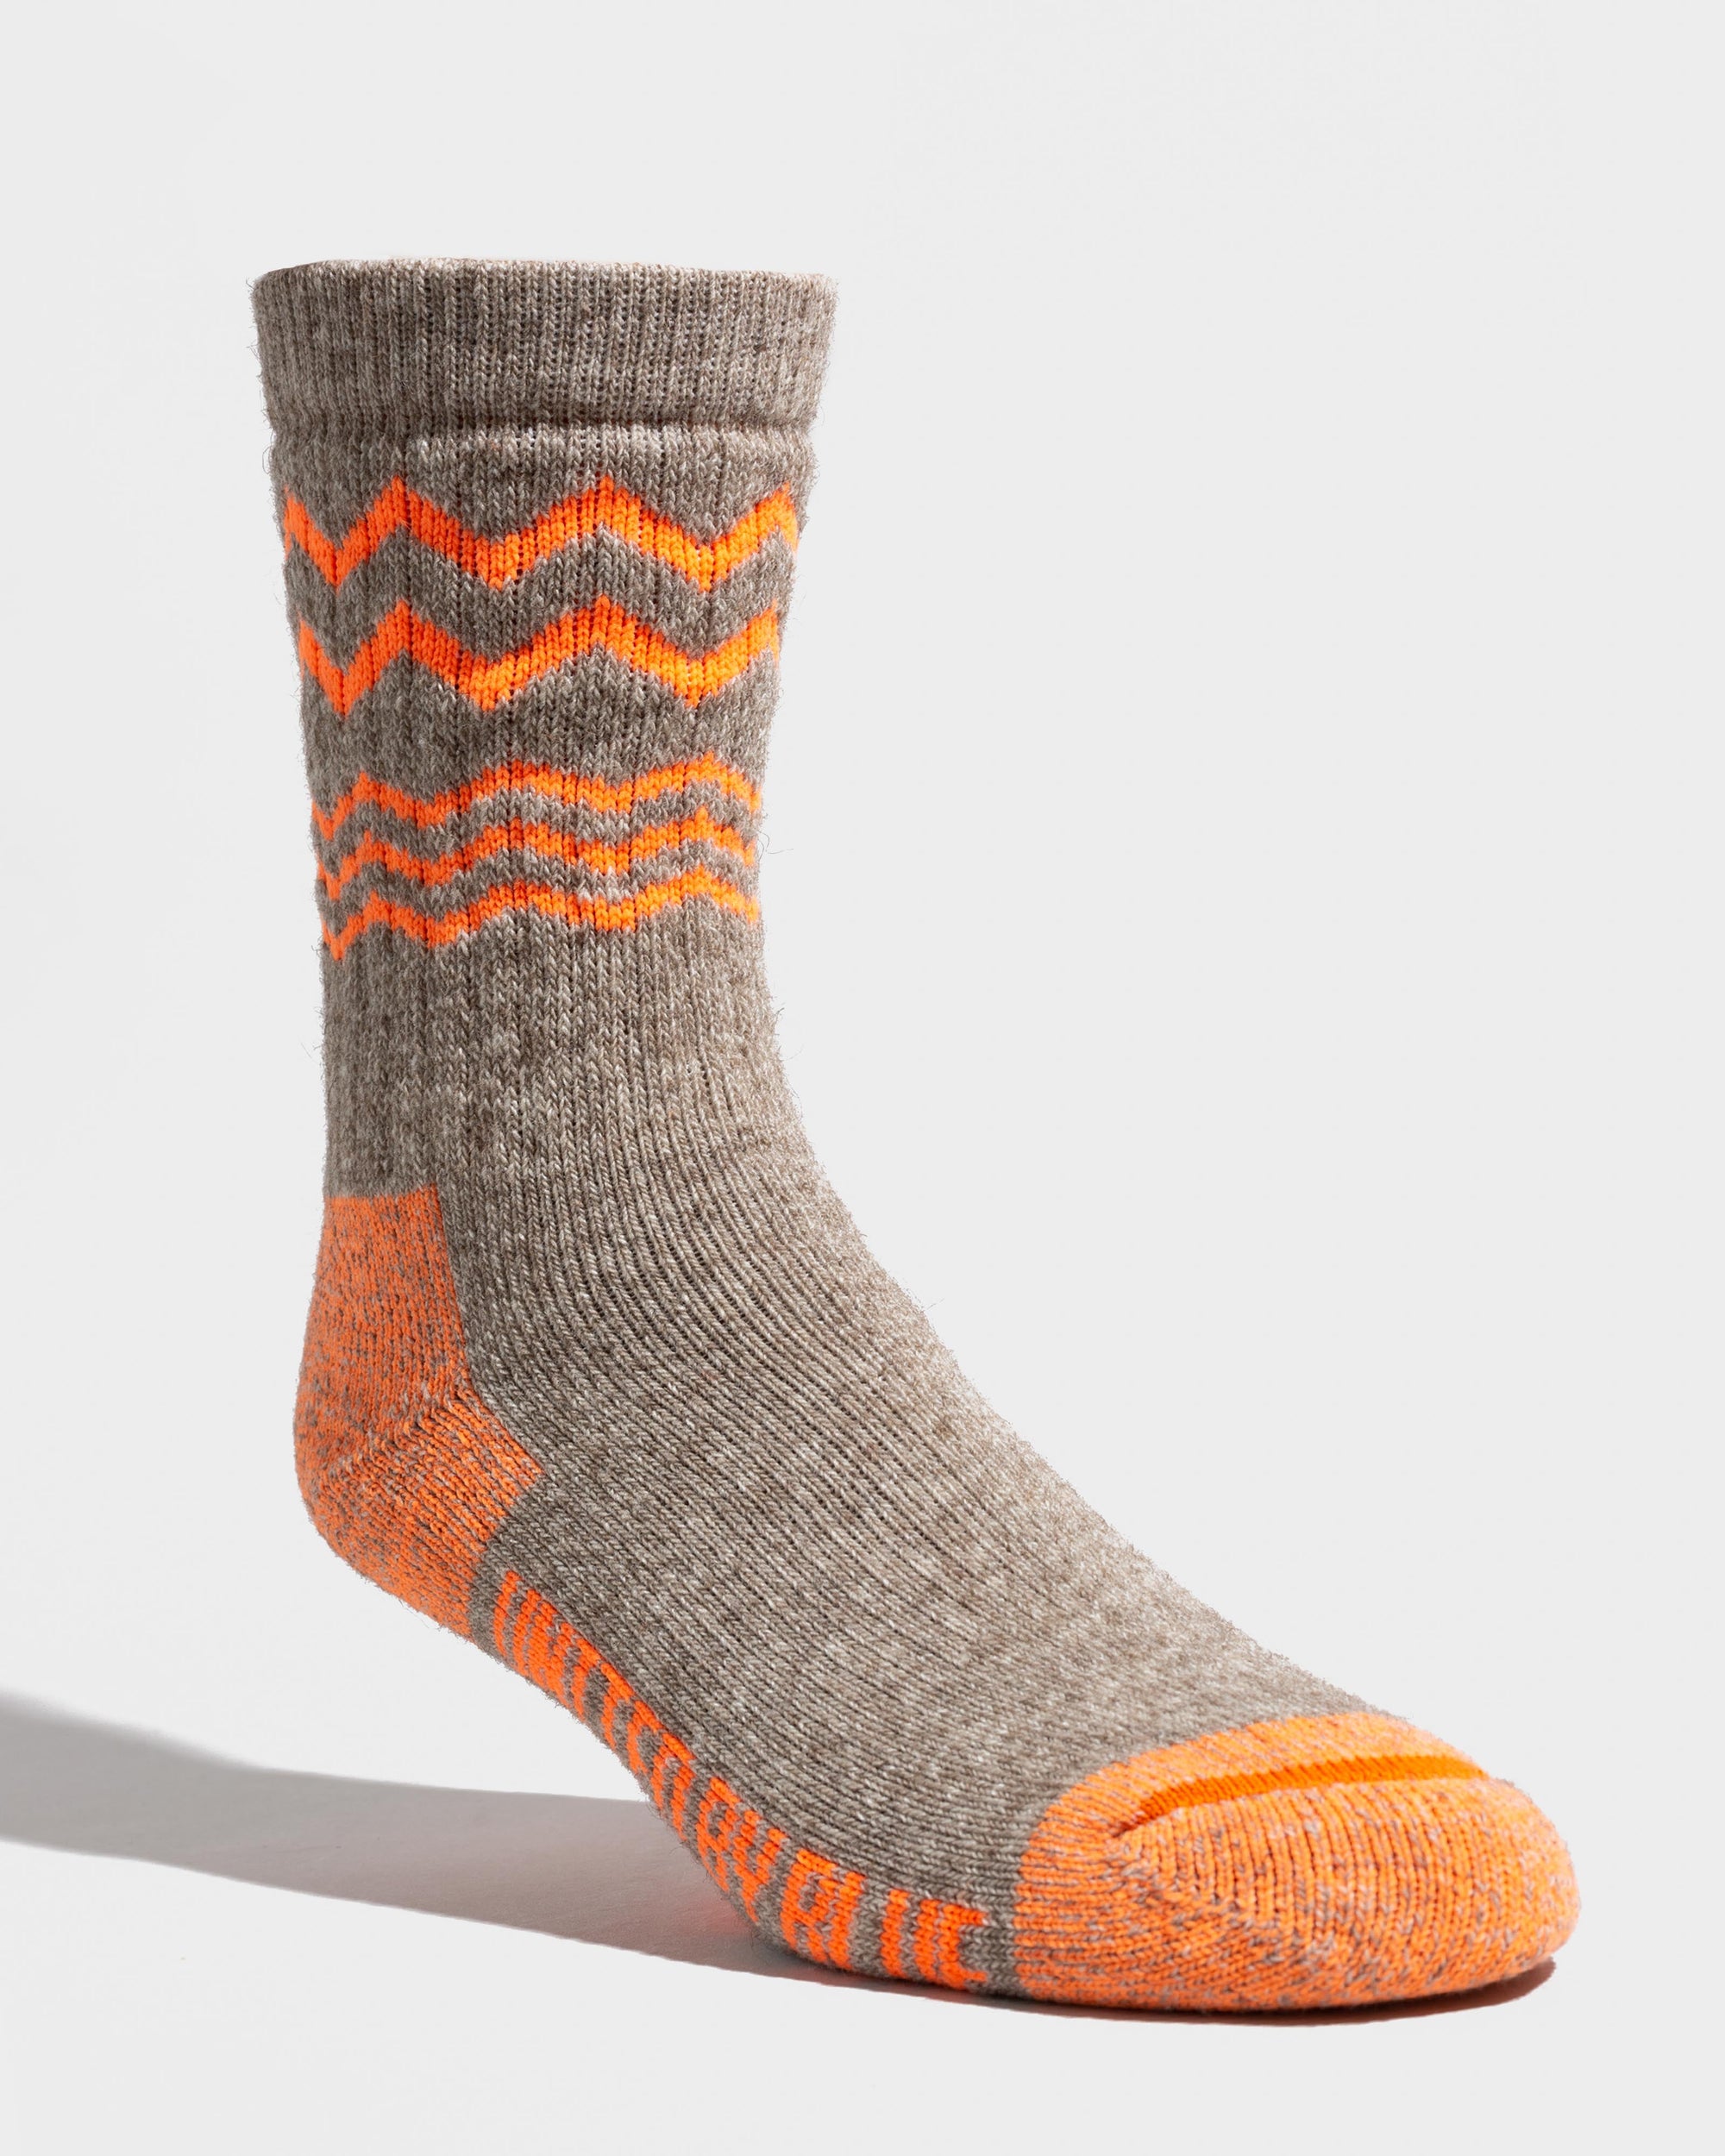 The Ultimate Bison Sock